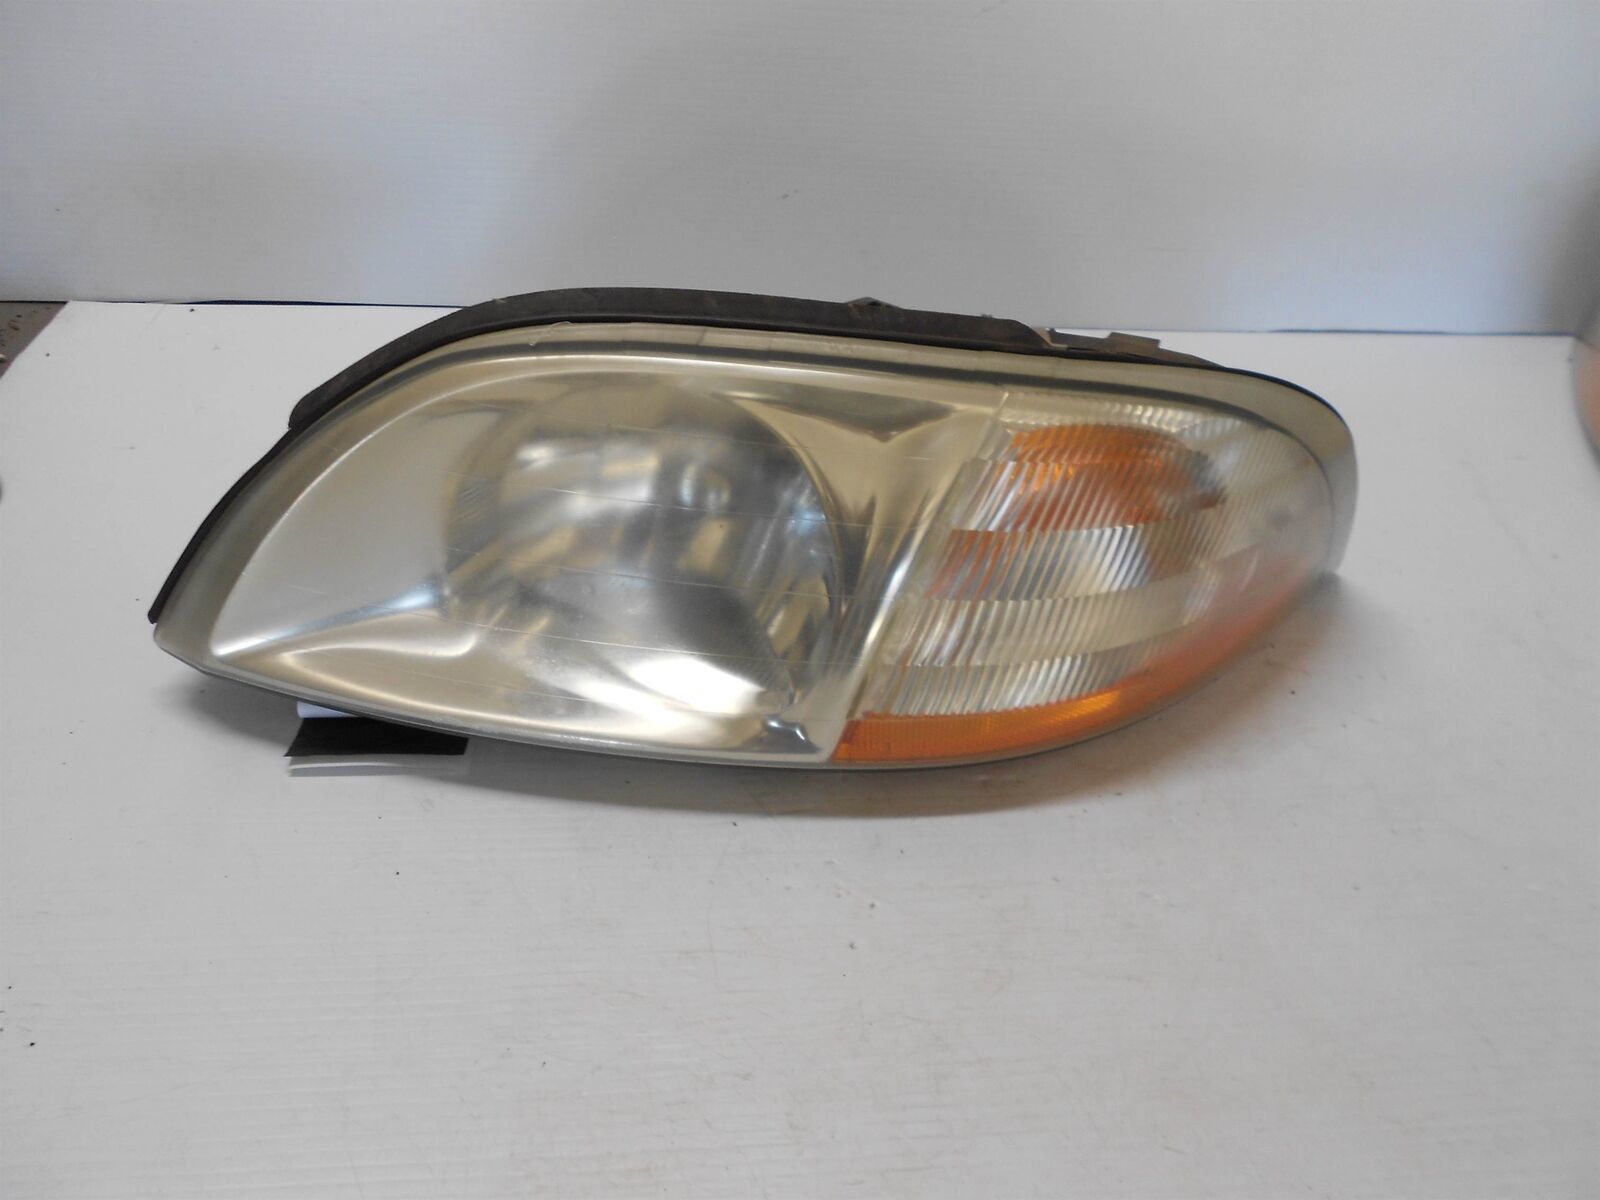 Primary image for 1999 - 2003 FORD WINDSTAR HEADLIGHT LAMP ASSEMBLY FRONT LEFT DRIVER SIDE LH OEM